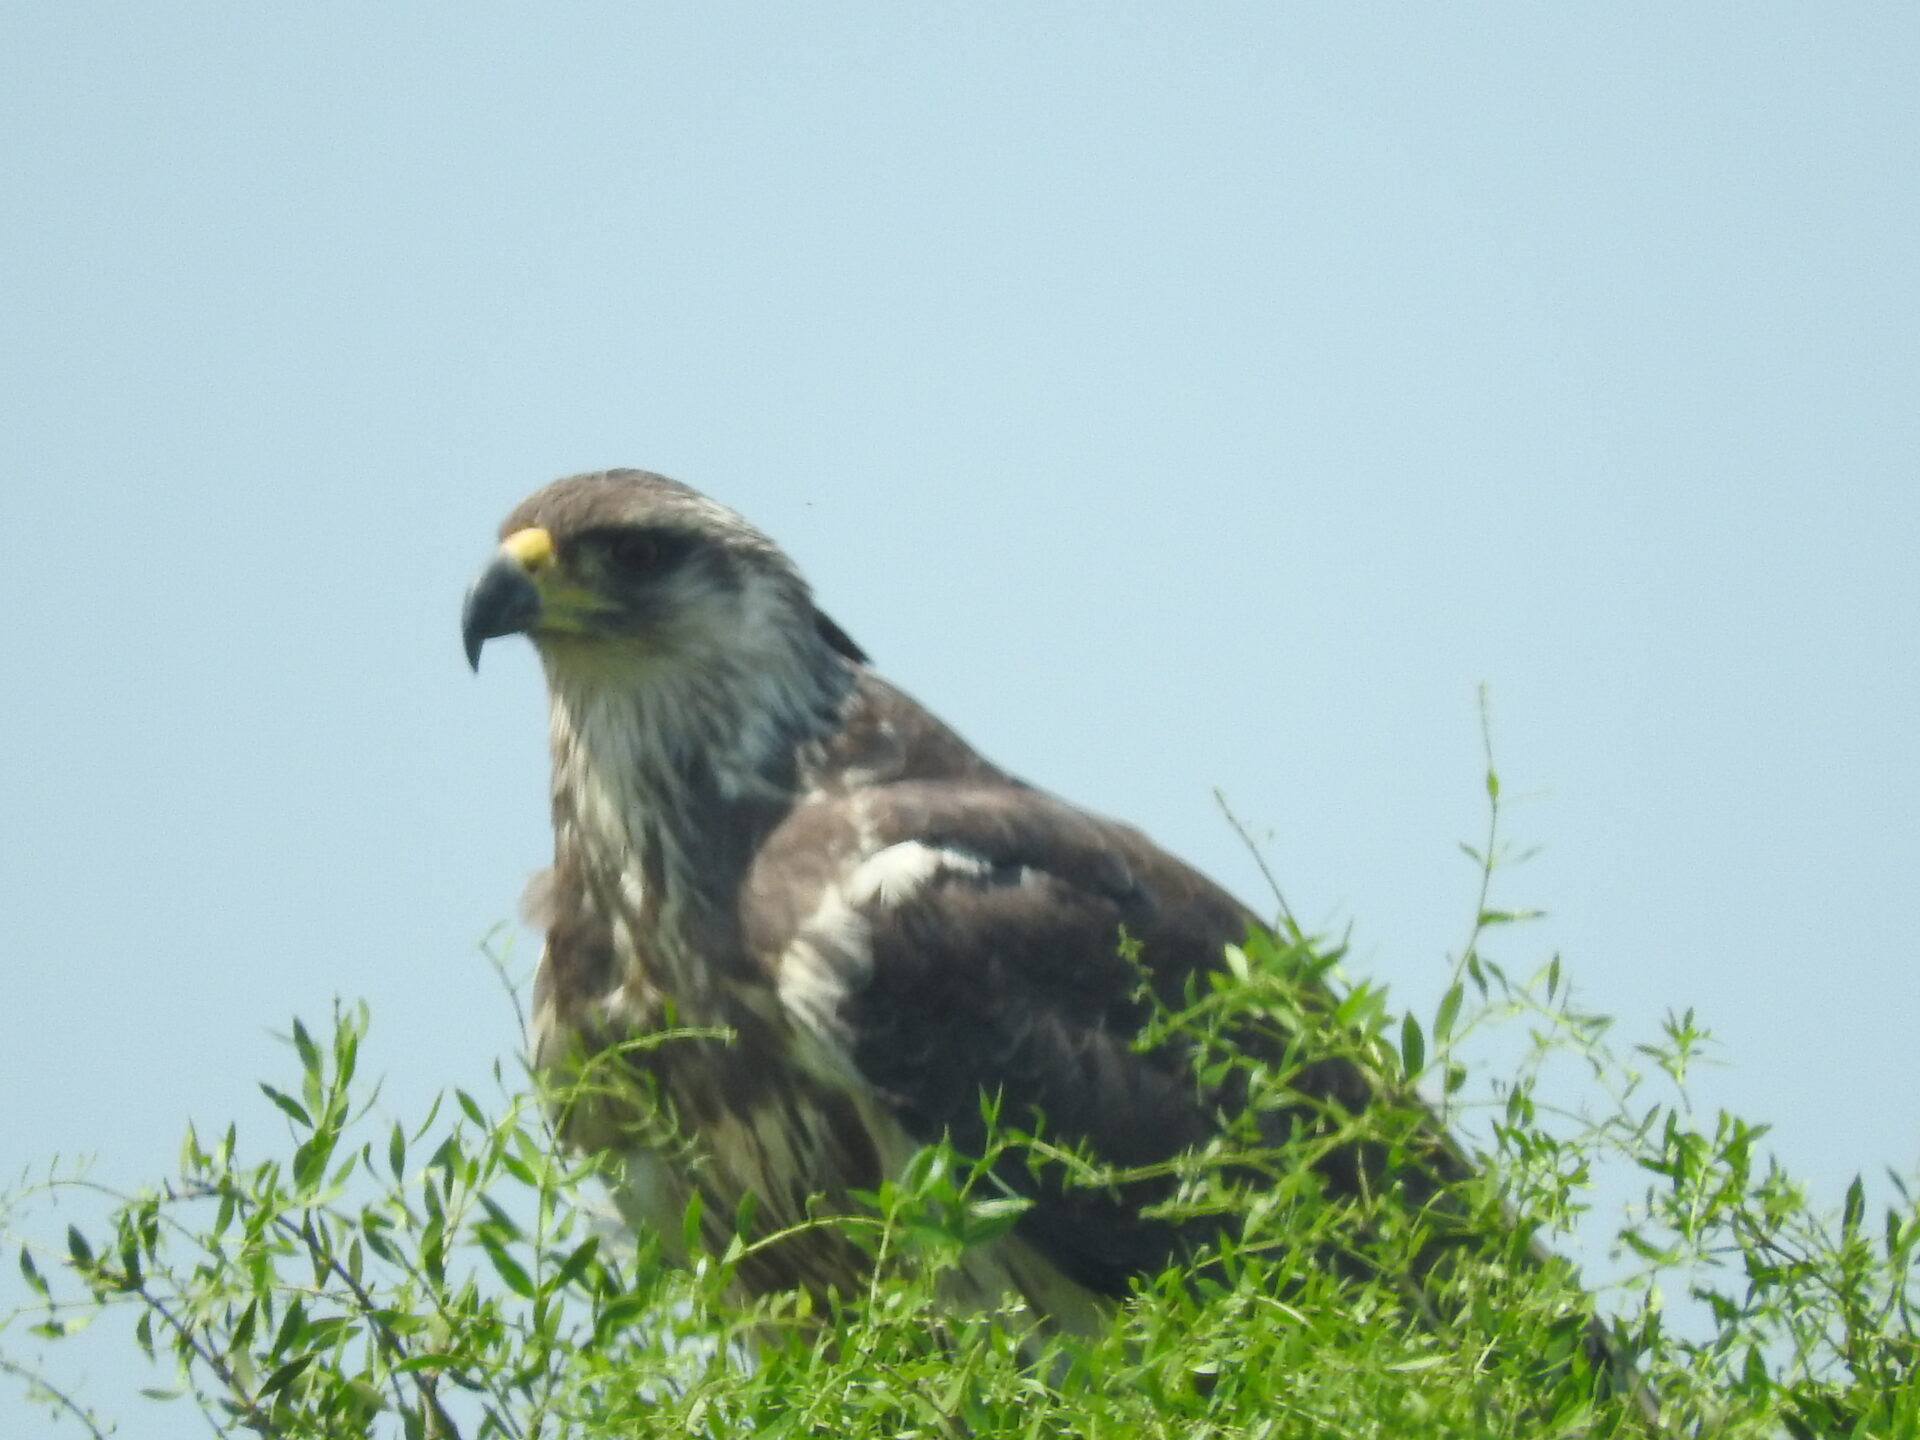 A photograph of one of South America’s largest birds of prey and yet little known, the Chaco Eagle. Credit: FBA 